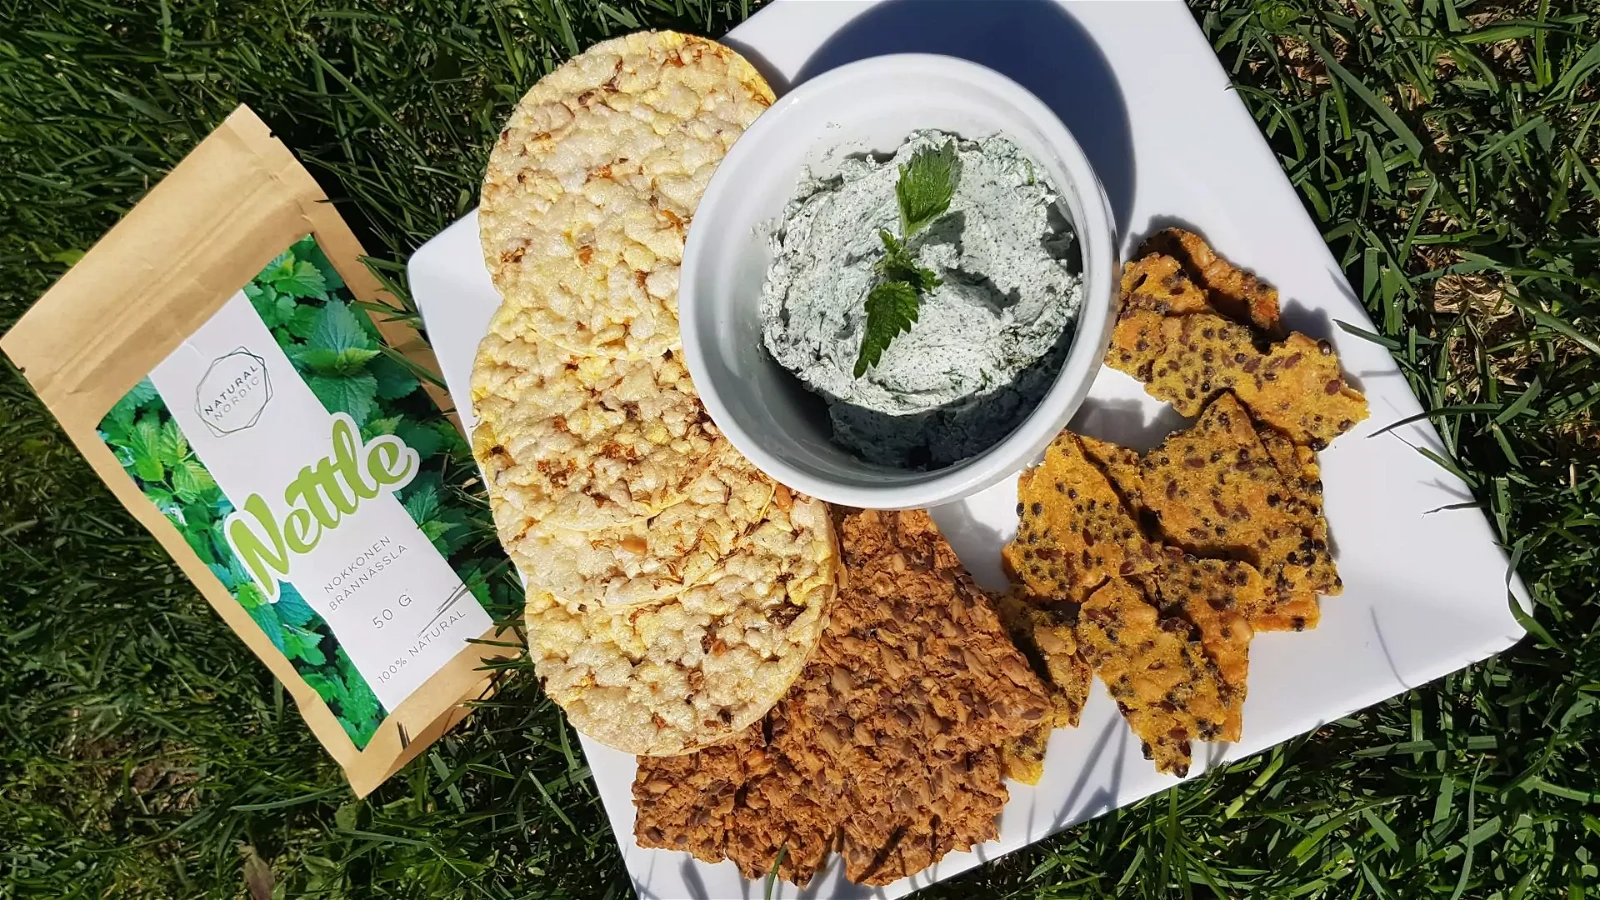 Image of Nettle goat cheese spread